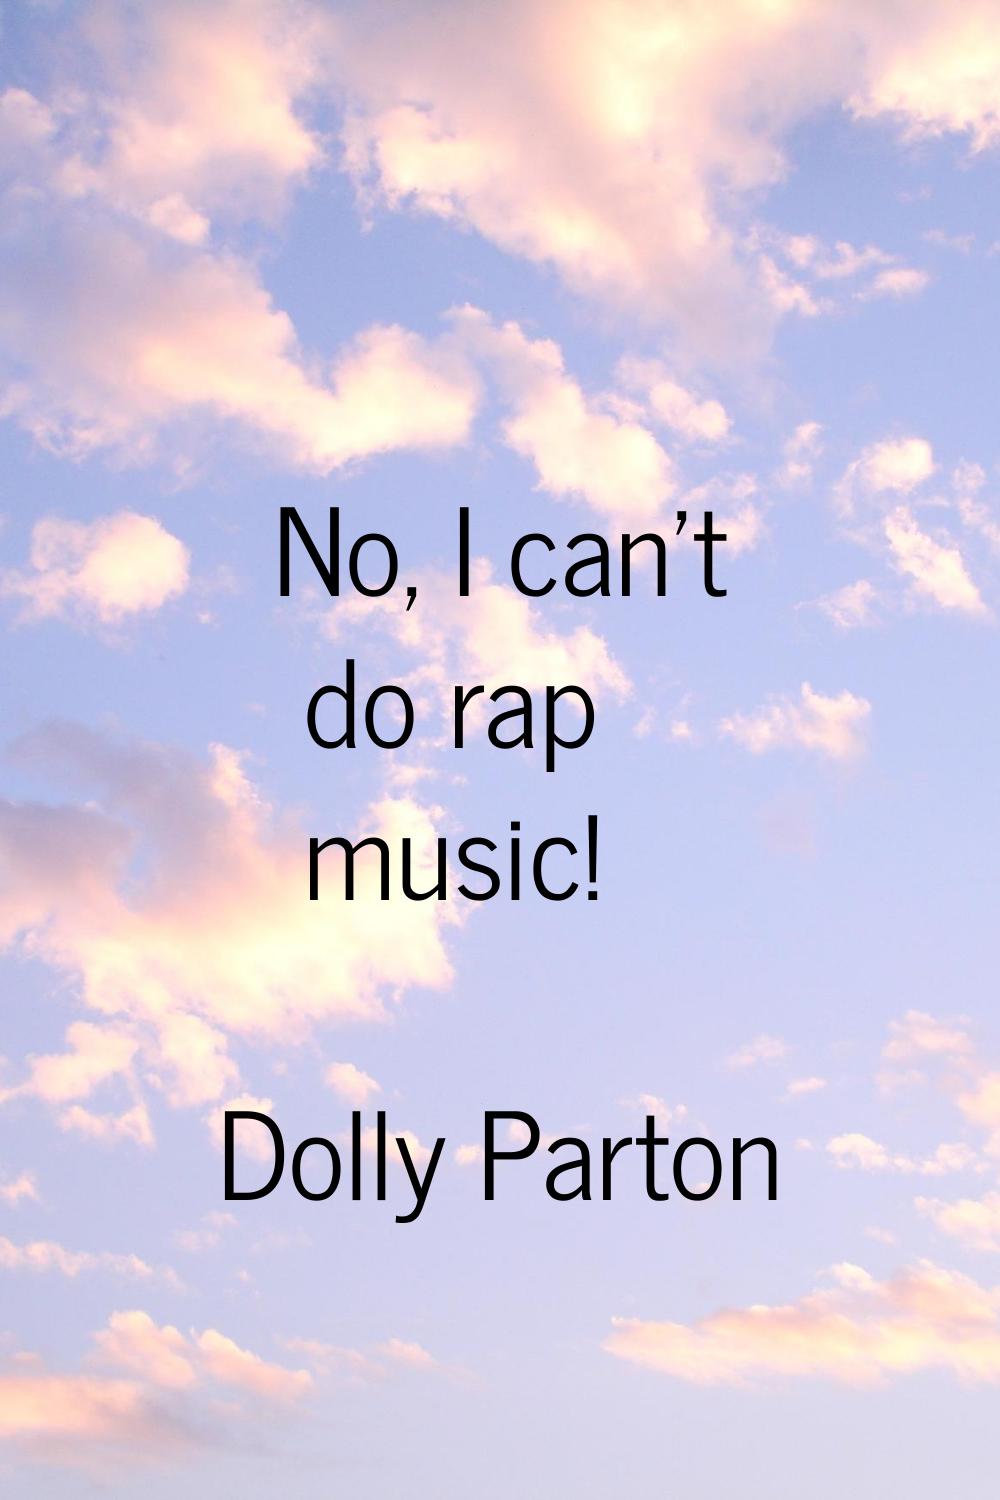 No, I can't do rap music!